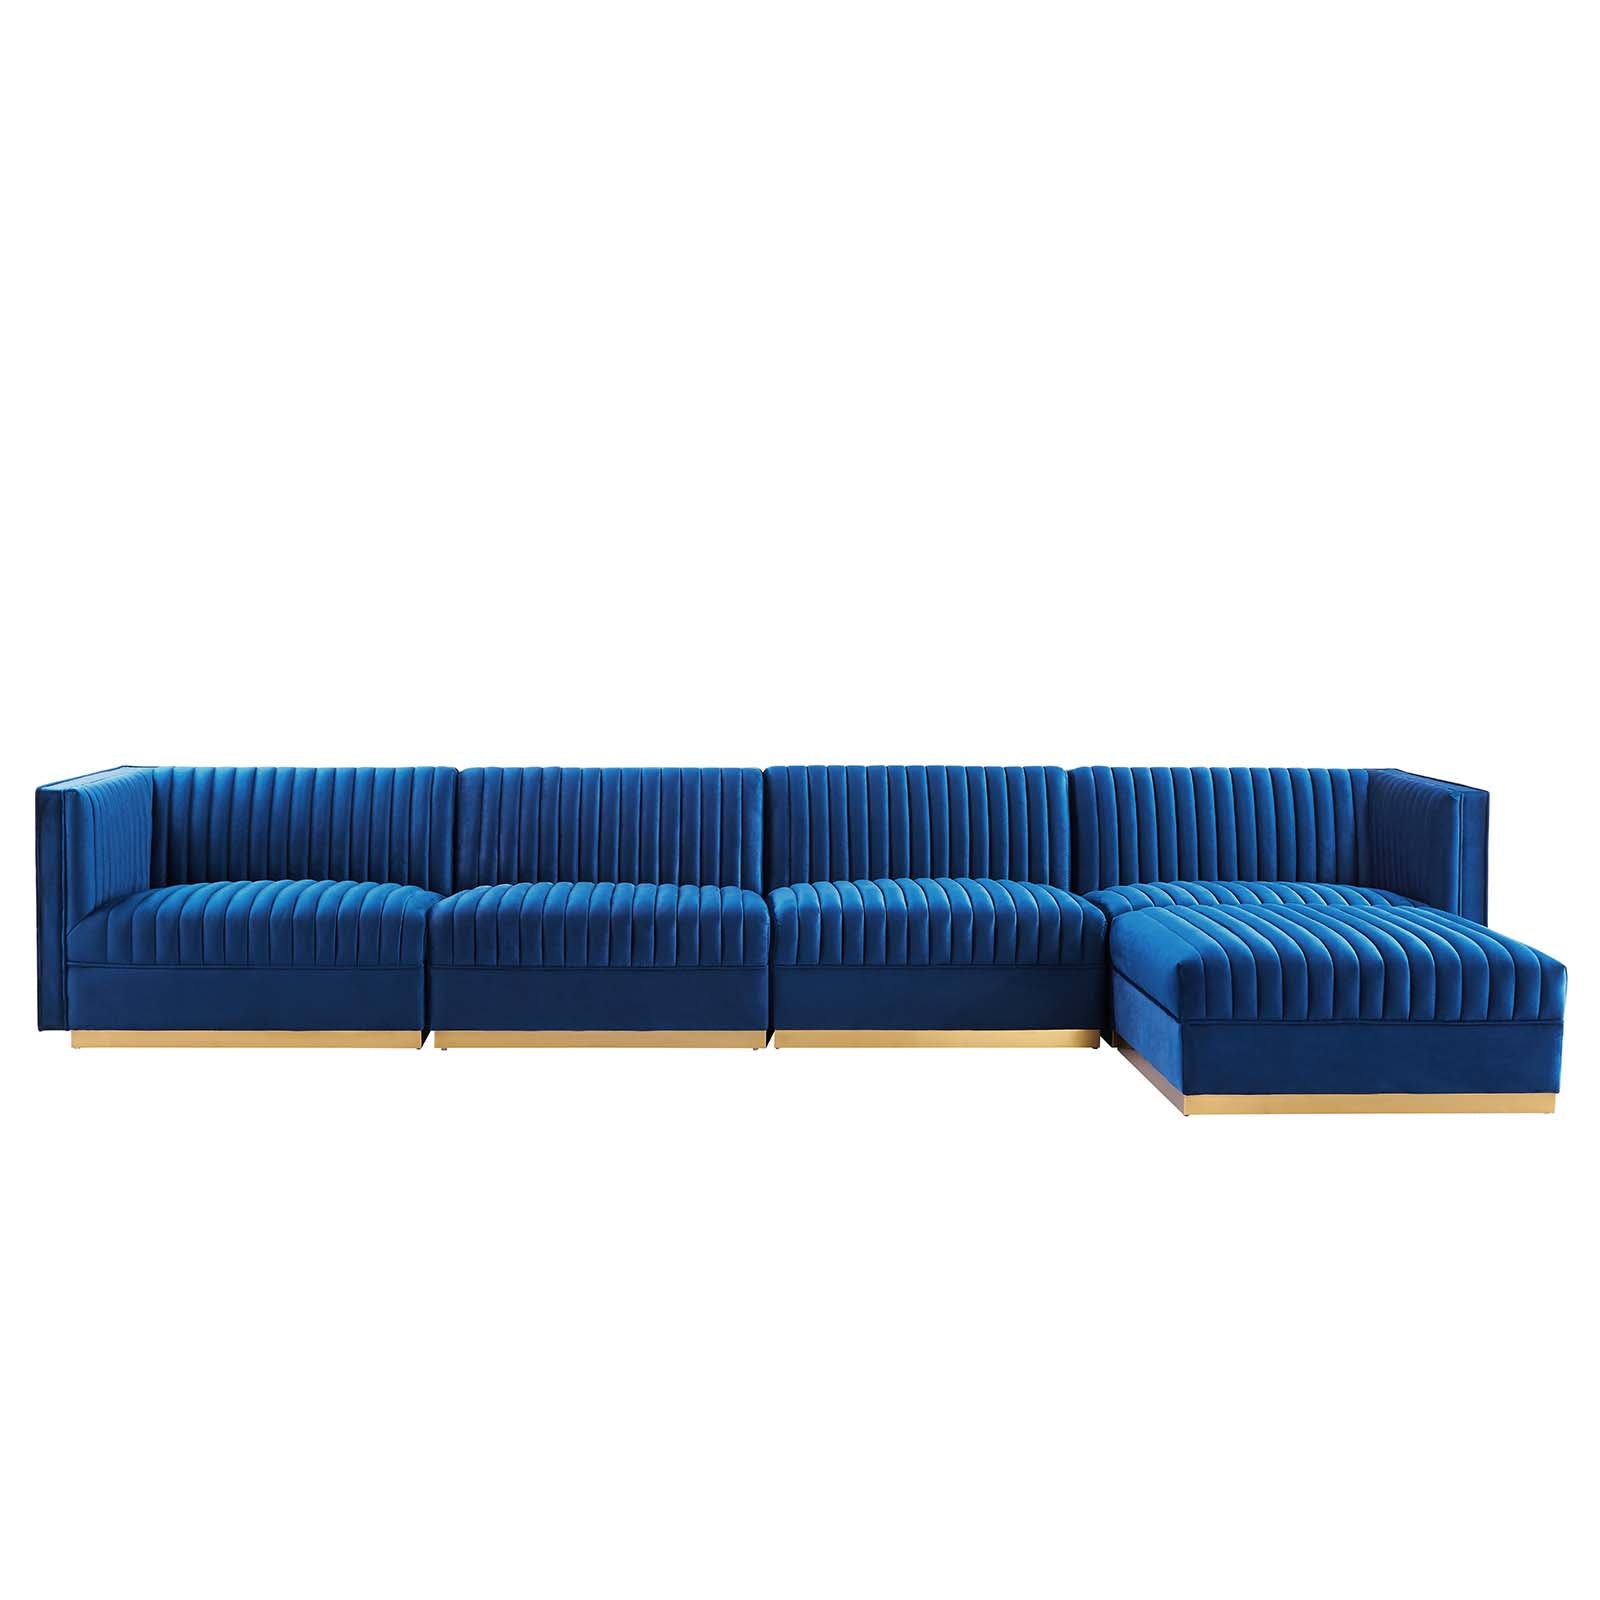 Modway Sectional Sofas - Sanguine Channel Tufted Performance Velvet 5 Piece Modular Sectional Sofa Navy